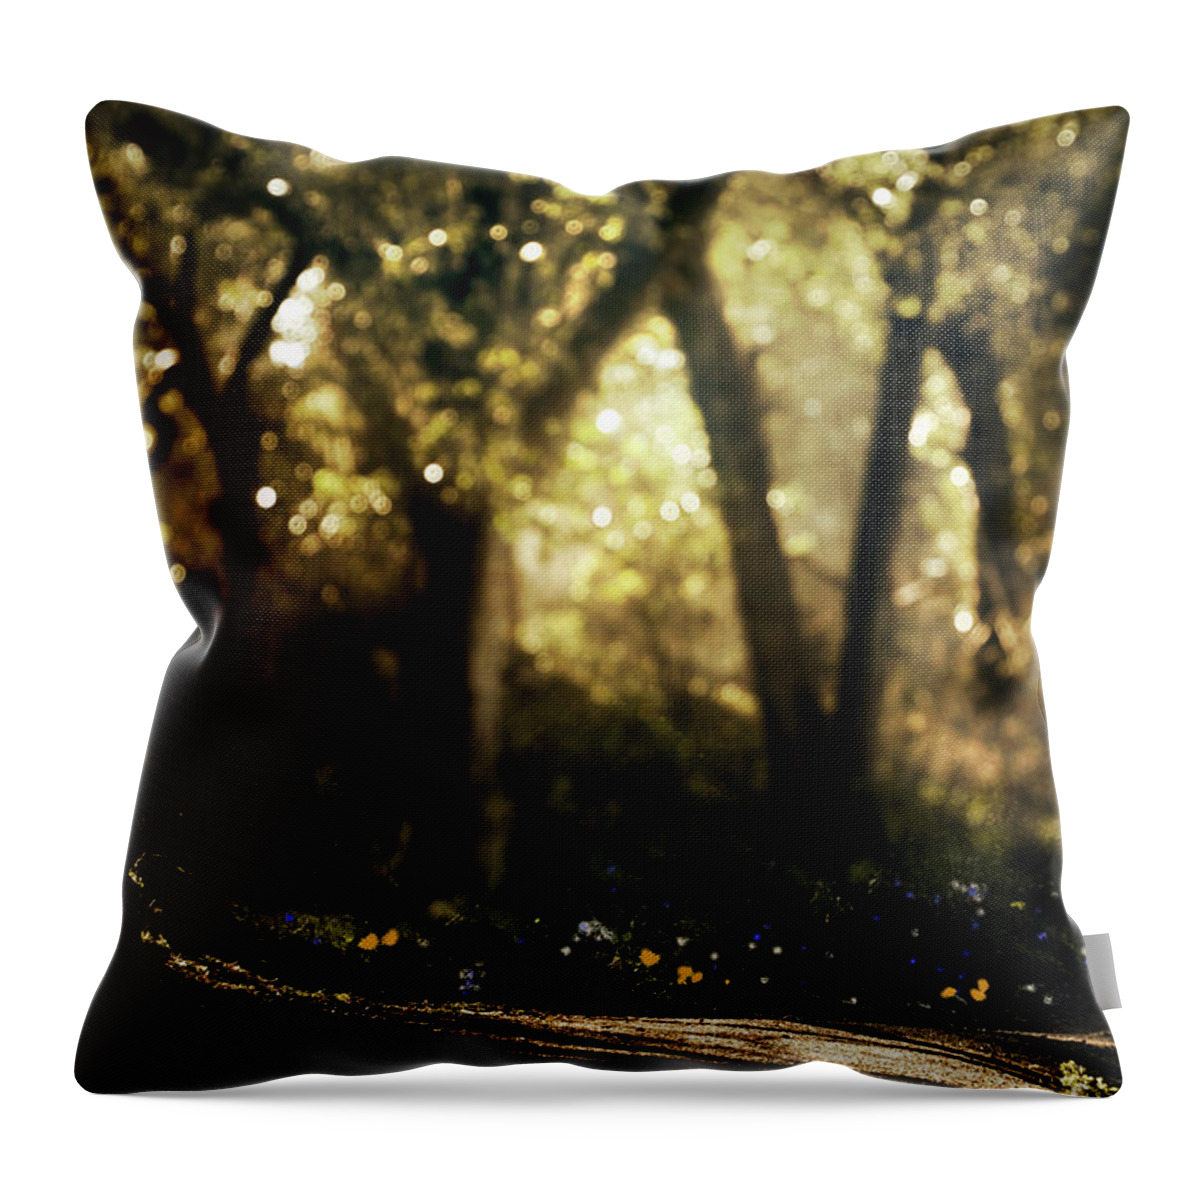  Throw Pillow featuring the photograph Late Afternoon by Cybele Moon